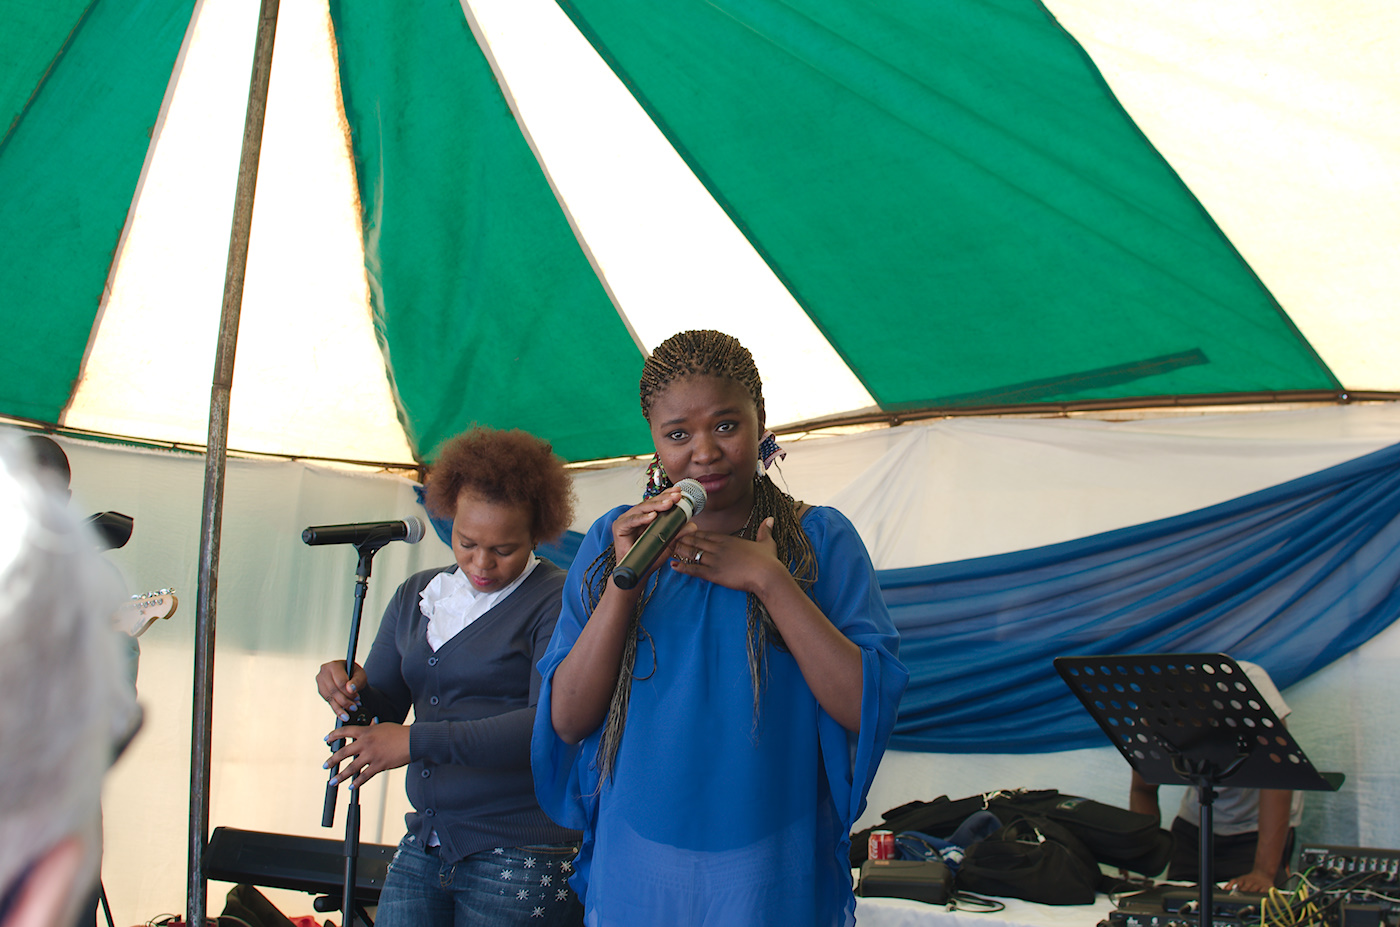 The awesome Thabisa Mhlakulwana lent her powerful voice with a few jazz and soul classics in English and isiXhosa.